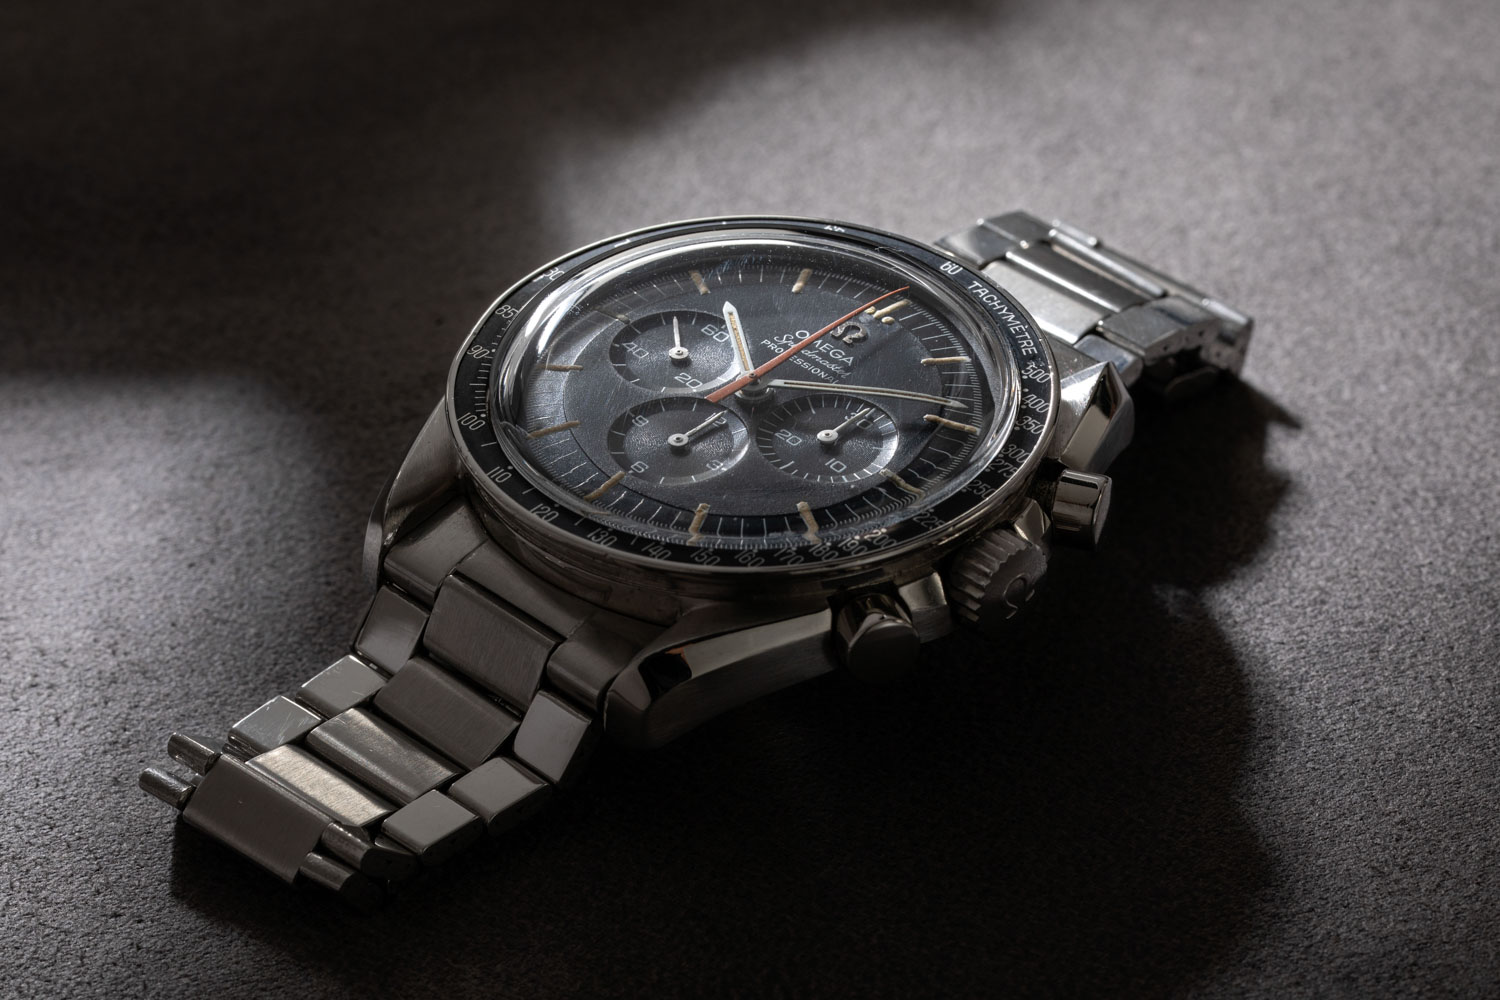 The 1968 Speedmaster ref. ST 145.012-67 with the peculiar orange chrono hand that collectors have nicknamed: The Ultraman (©Revolution)